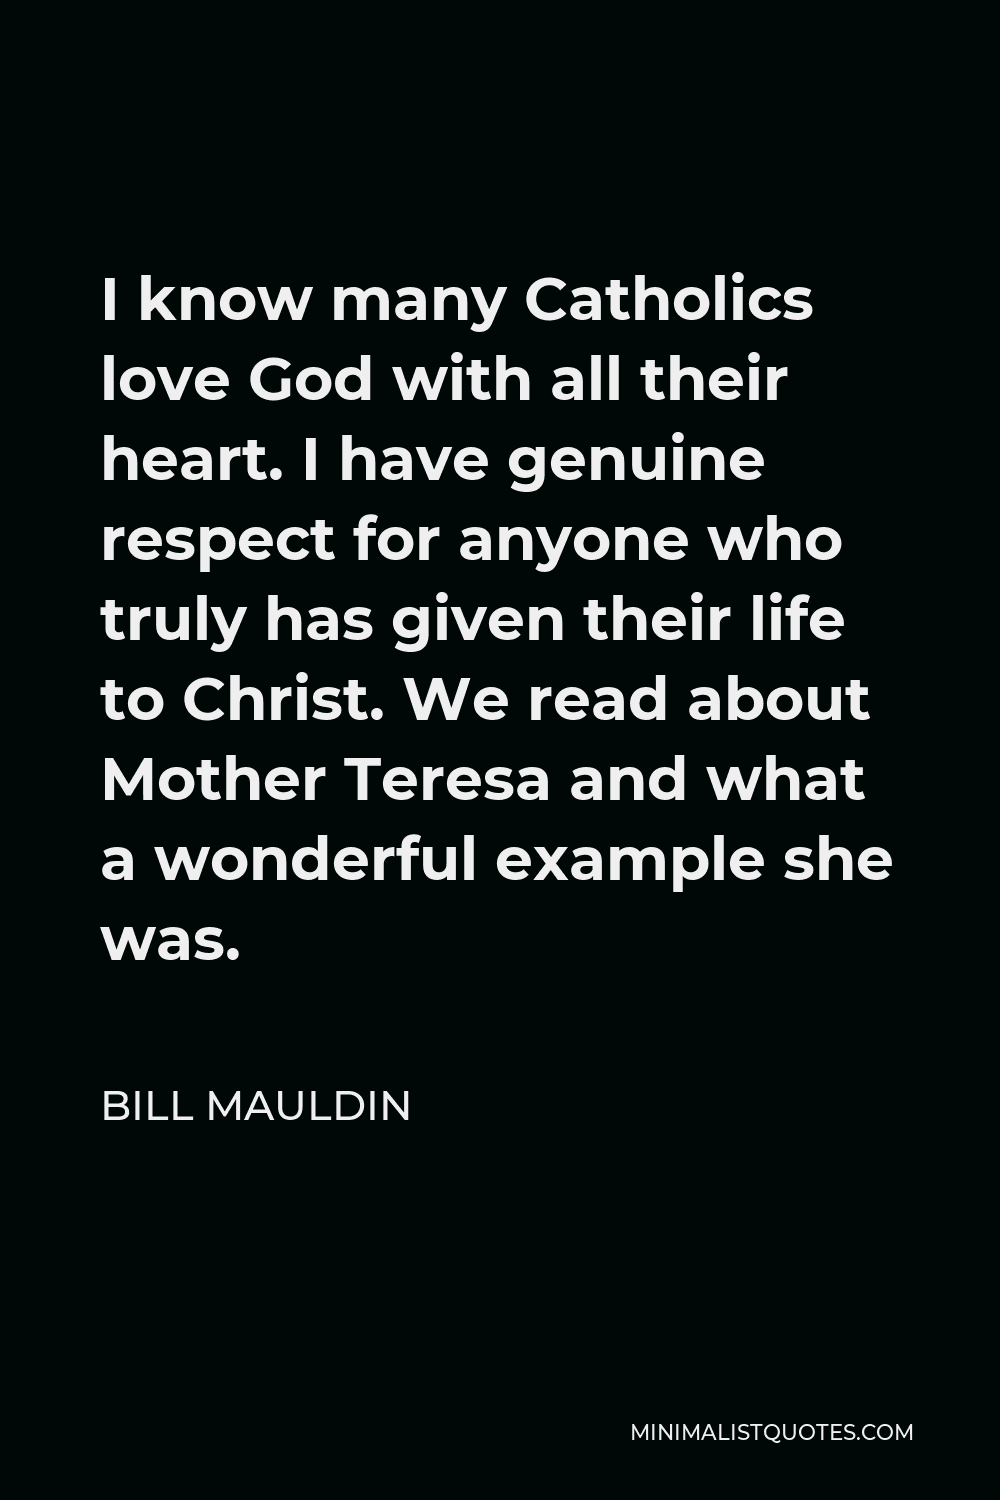 Bill Mauldin Quote - I know many Catholics love God with all their heart. I have genuine respect for anyone who truly has given their life to Christ. We read about Mother Teresa and what a wonderful example she was.